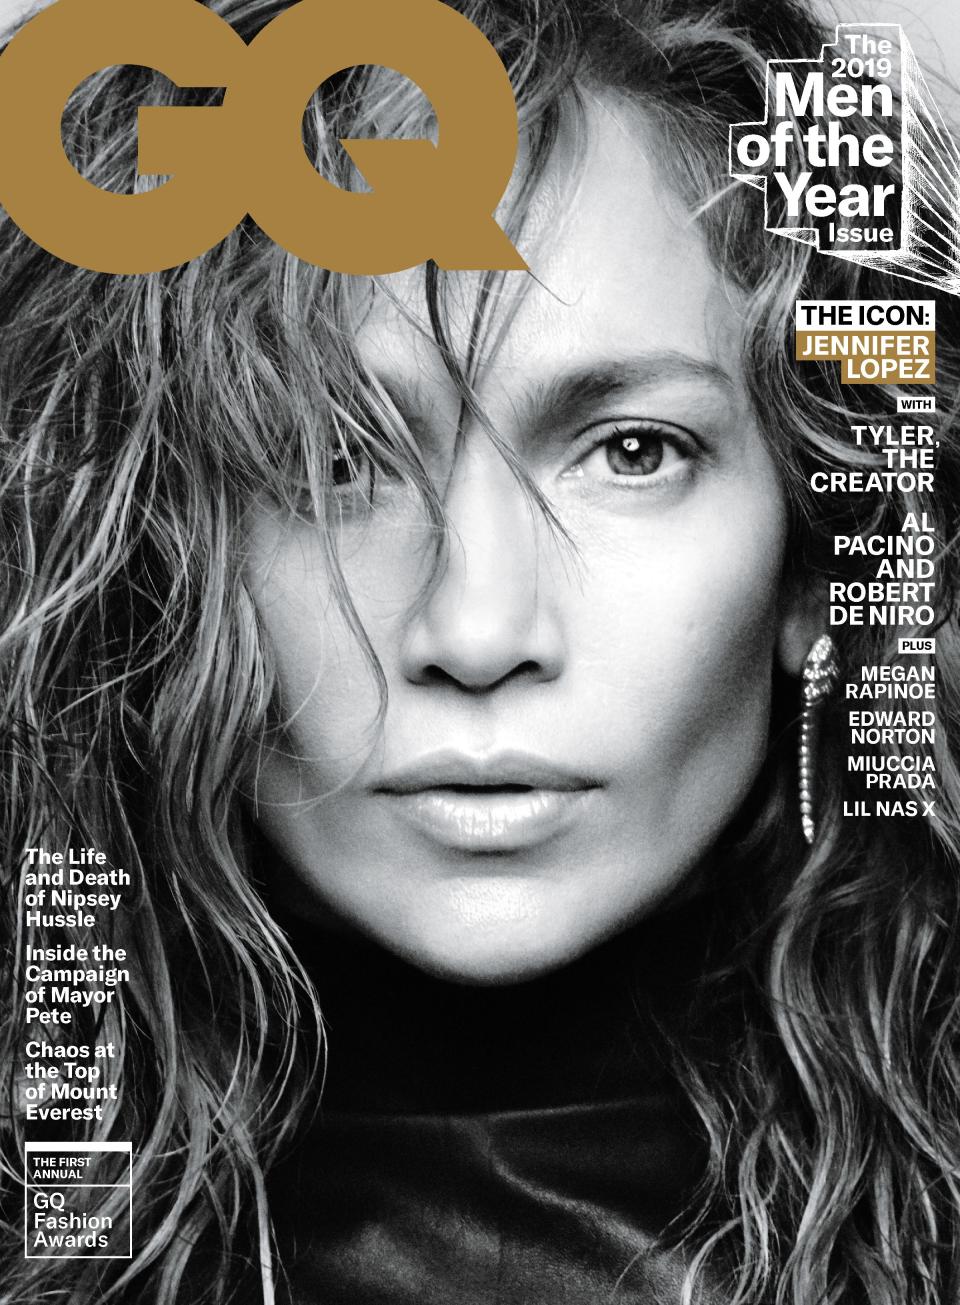 Jennifer Lopez is GQ's Icon of the Year. Click here to subscribe to GQ.